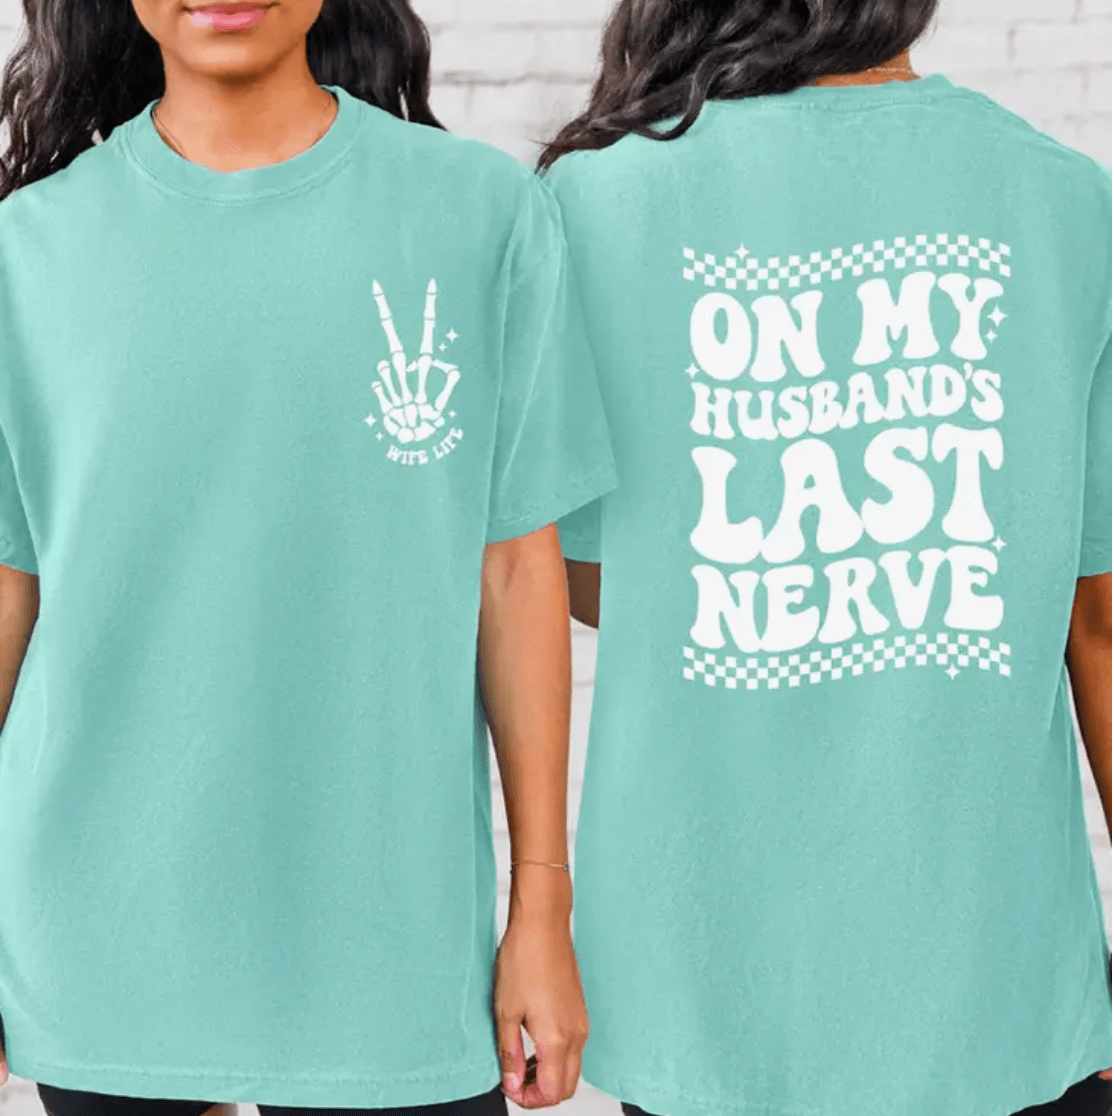 ON MY HUSBAND'S LAST NERVE T-SHIRT (PLUS SIZE AVAILABLE)